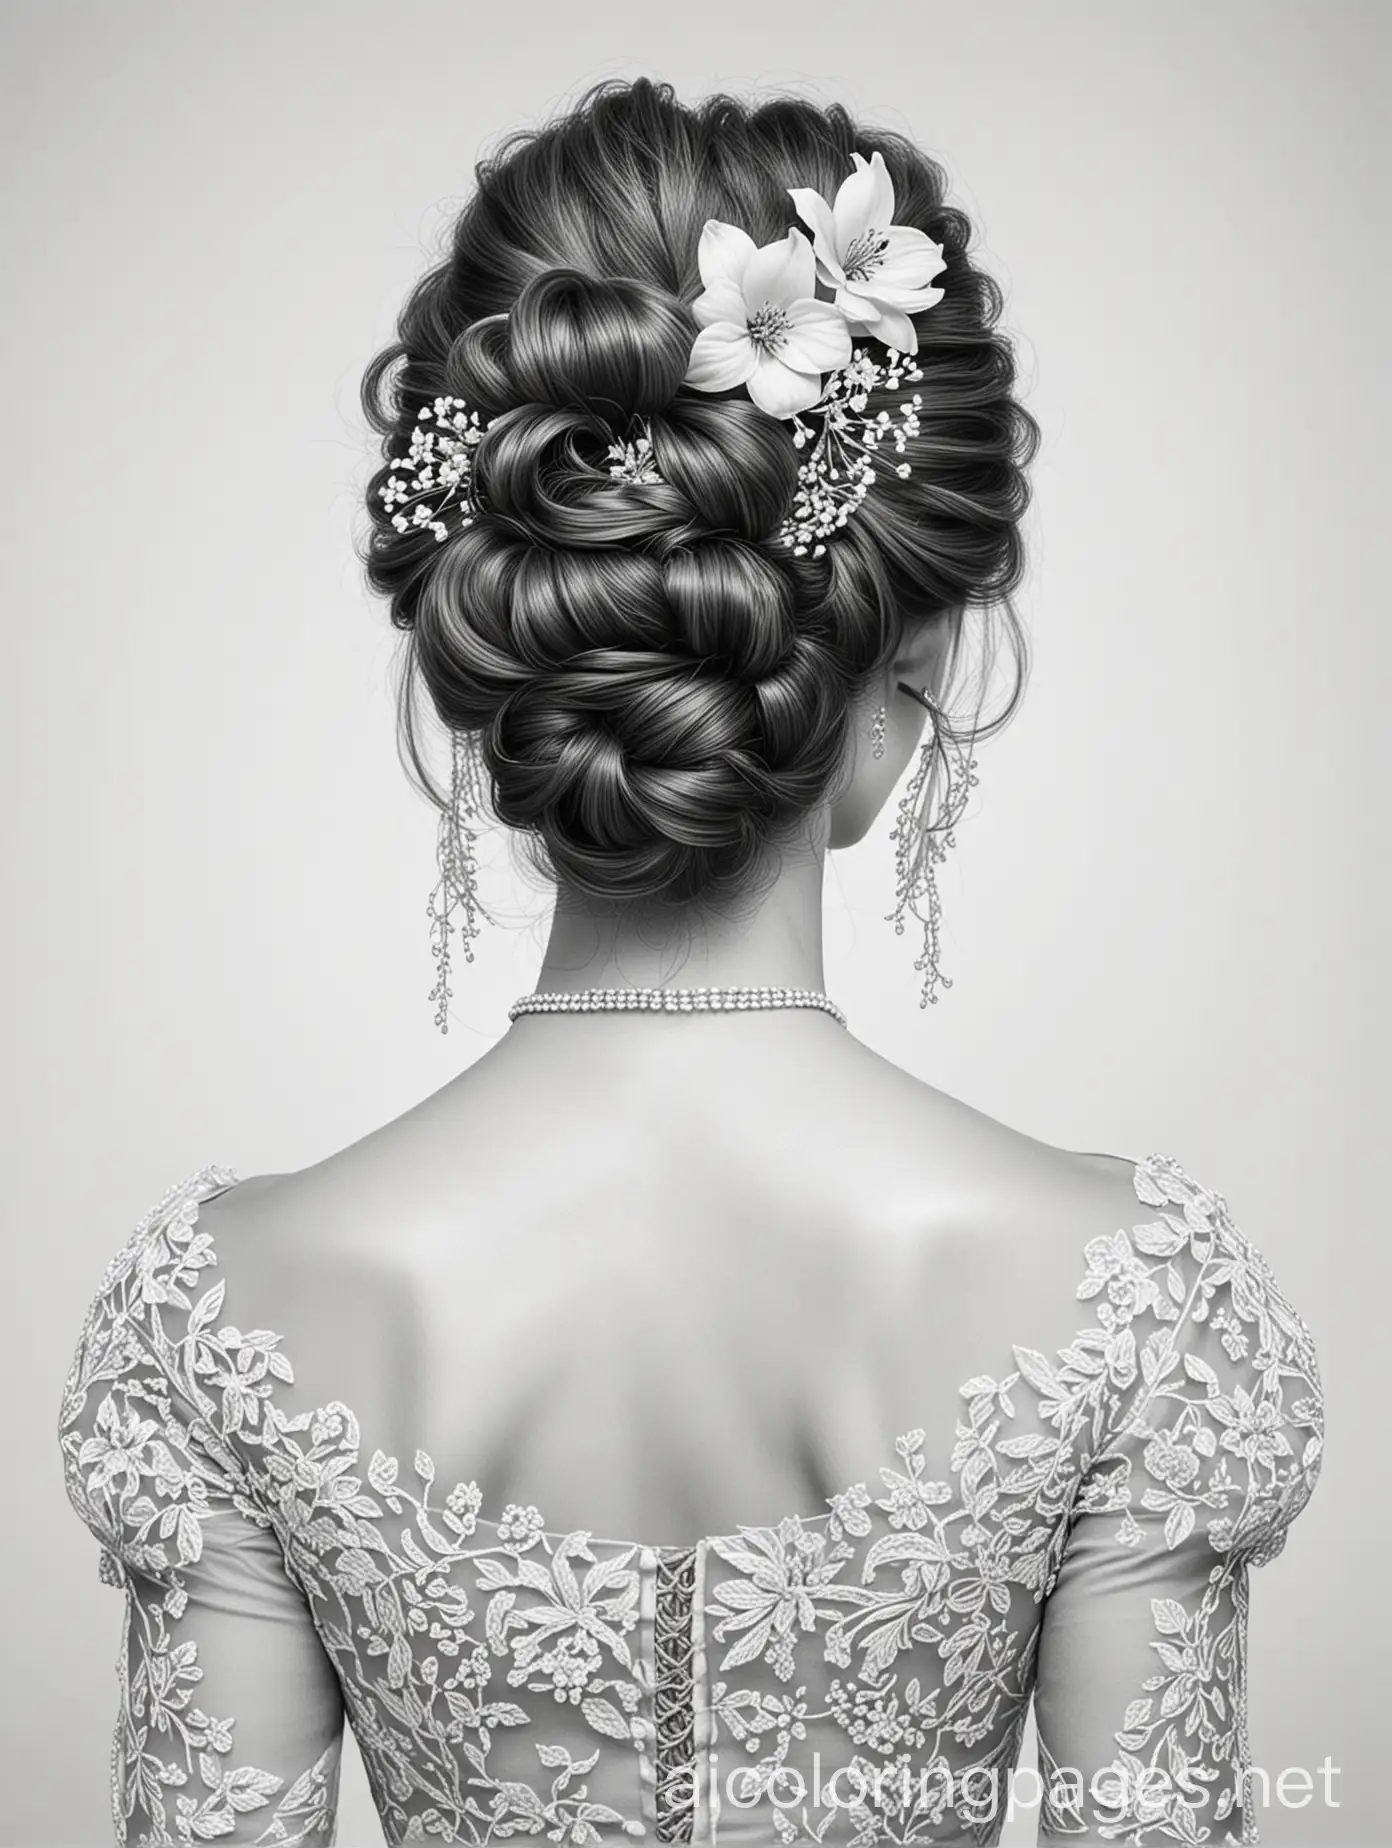 portrait from behind of hair in a fancy Bridgerton updo with flowers and a fancy dress, Coloring Page, black and white, line art, white background, Simplicity, Ample White Space. The background of the coloring page is plain white to make it easy for young children to color within the lines. The outlines of all the subjects are easy to distinguish, making it simple for kids to color without too much difficulty